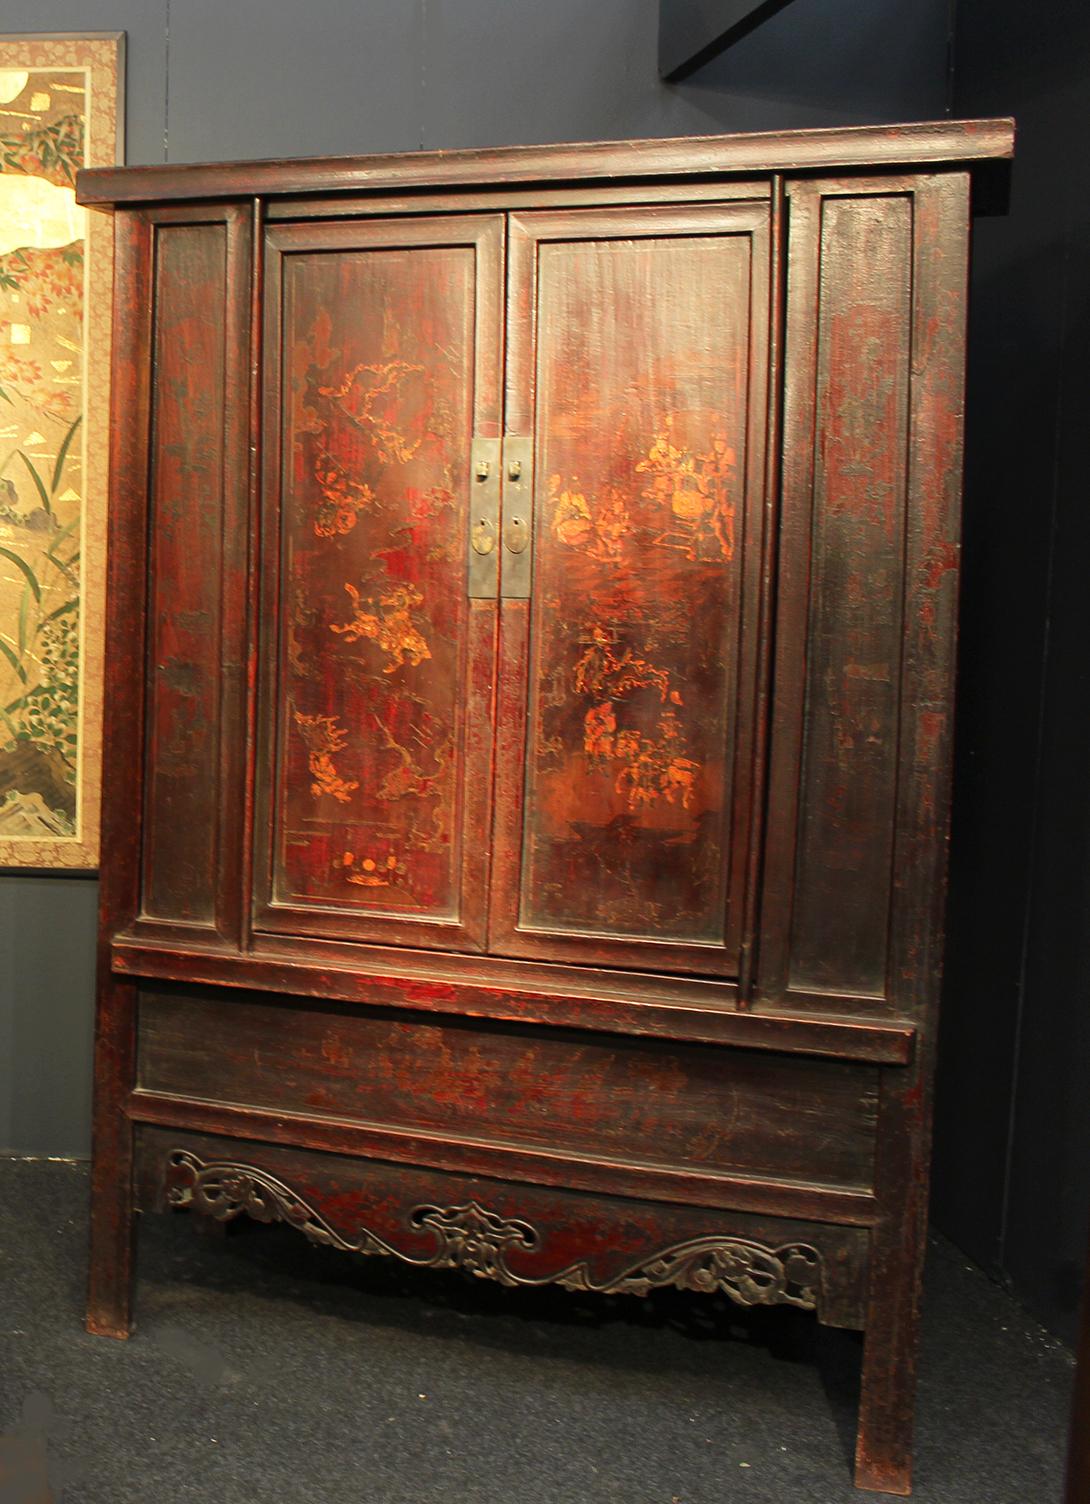 A beautiful and rare pair of 18th century Qing Dynasty bookcase furniture, in fine Chinese elm wood.
Each sturdy piece of furniture has an original thick lacquer and a slightly trapezoidal shape.
The silhouette shows a beautiful dark red lacquer